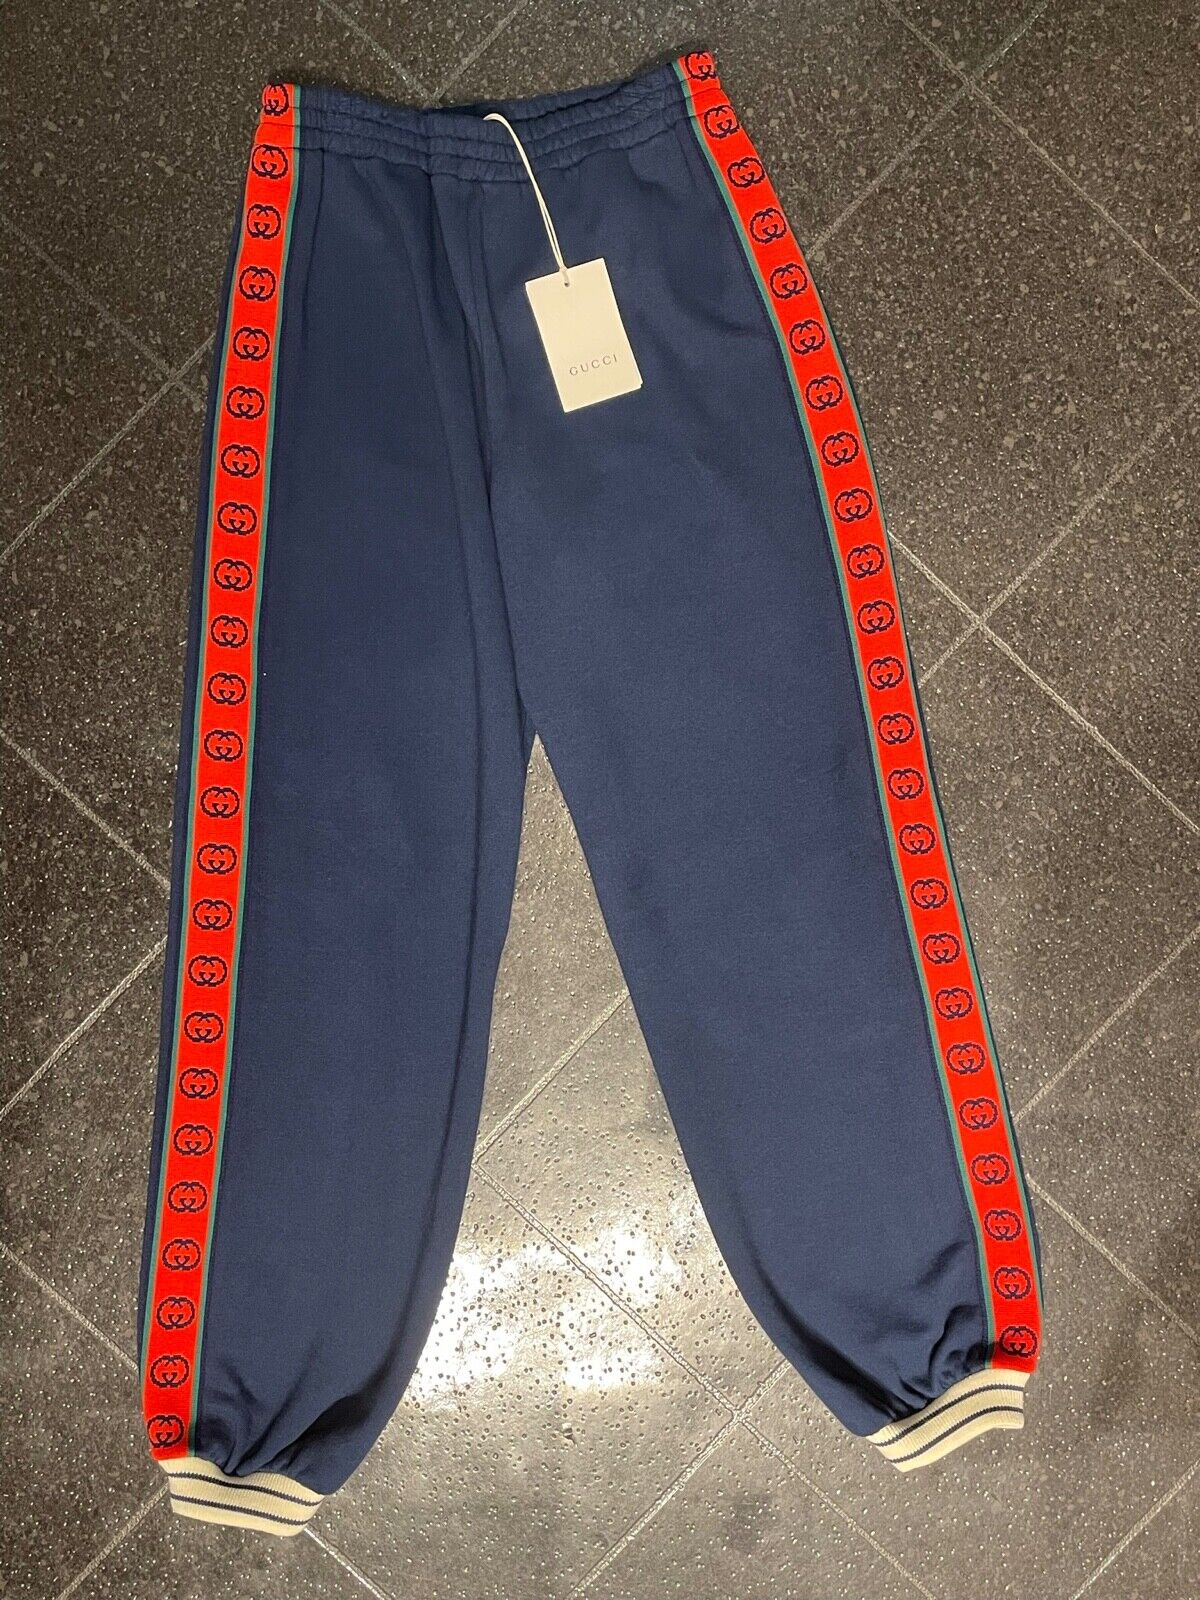 Details zu  BNWT Gucci Authentic Boys Navy Blue Trousers Size Age 8 Years GG Logo RRP £235 Hergestellt in Japan